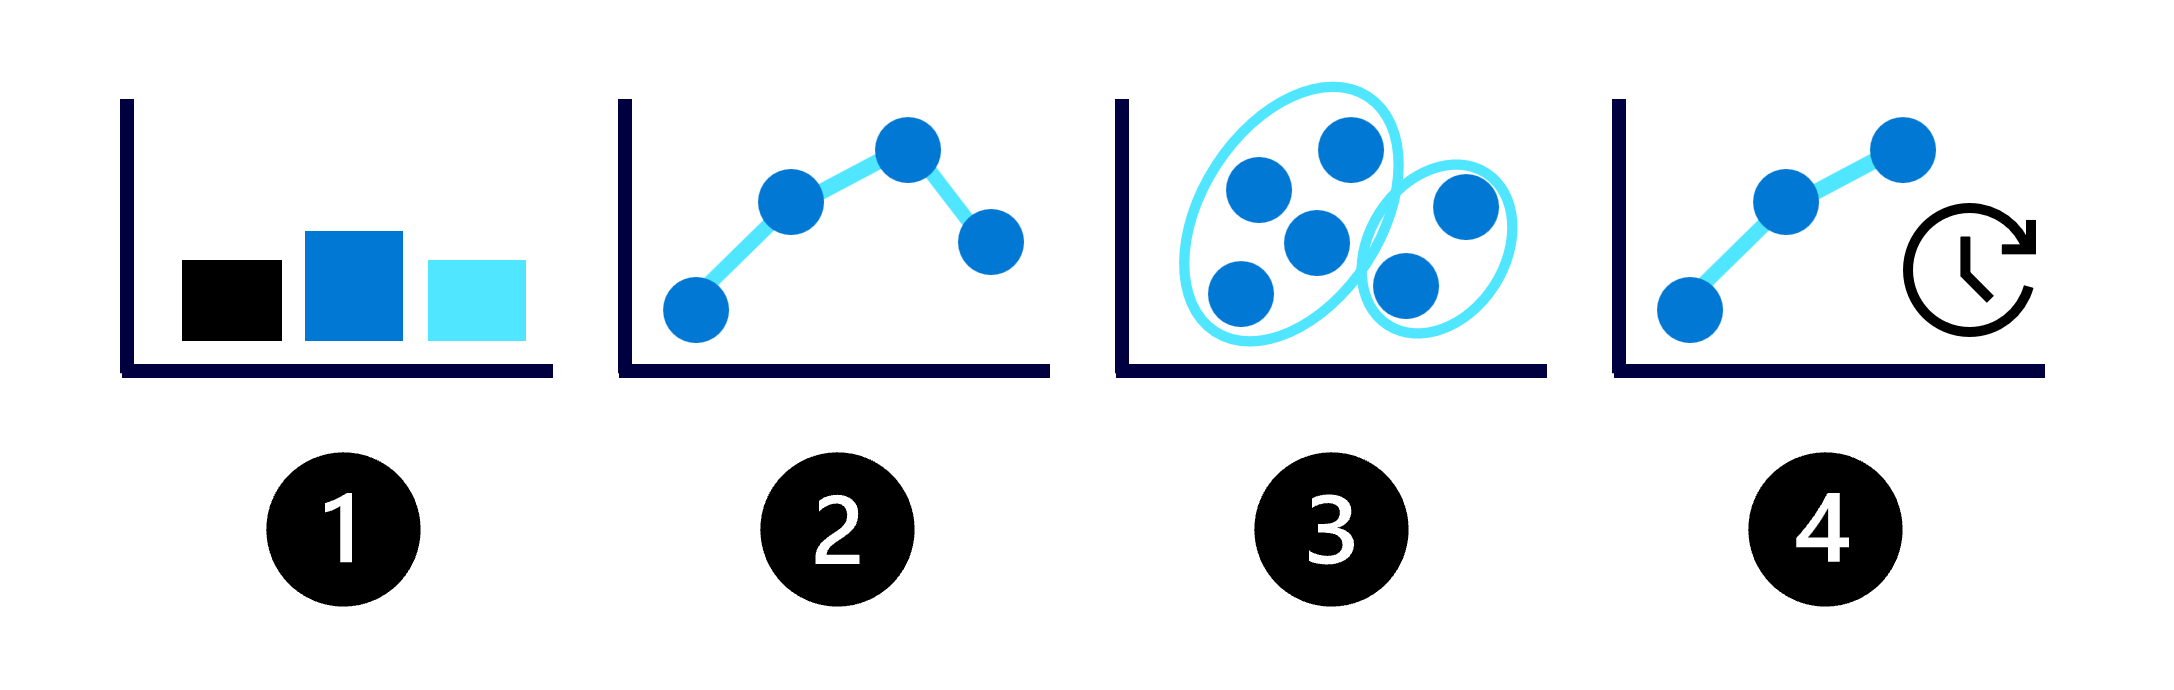 Diagram of the four common types of machine learning models.